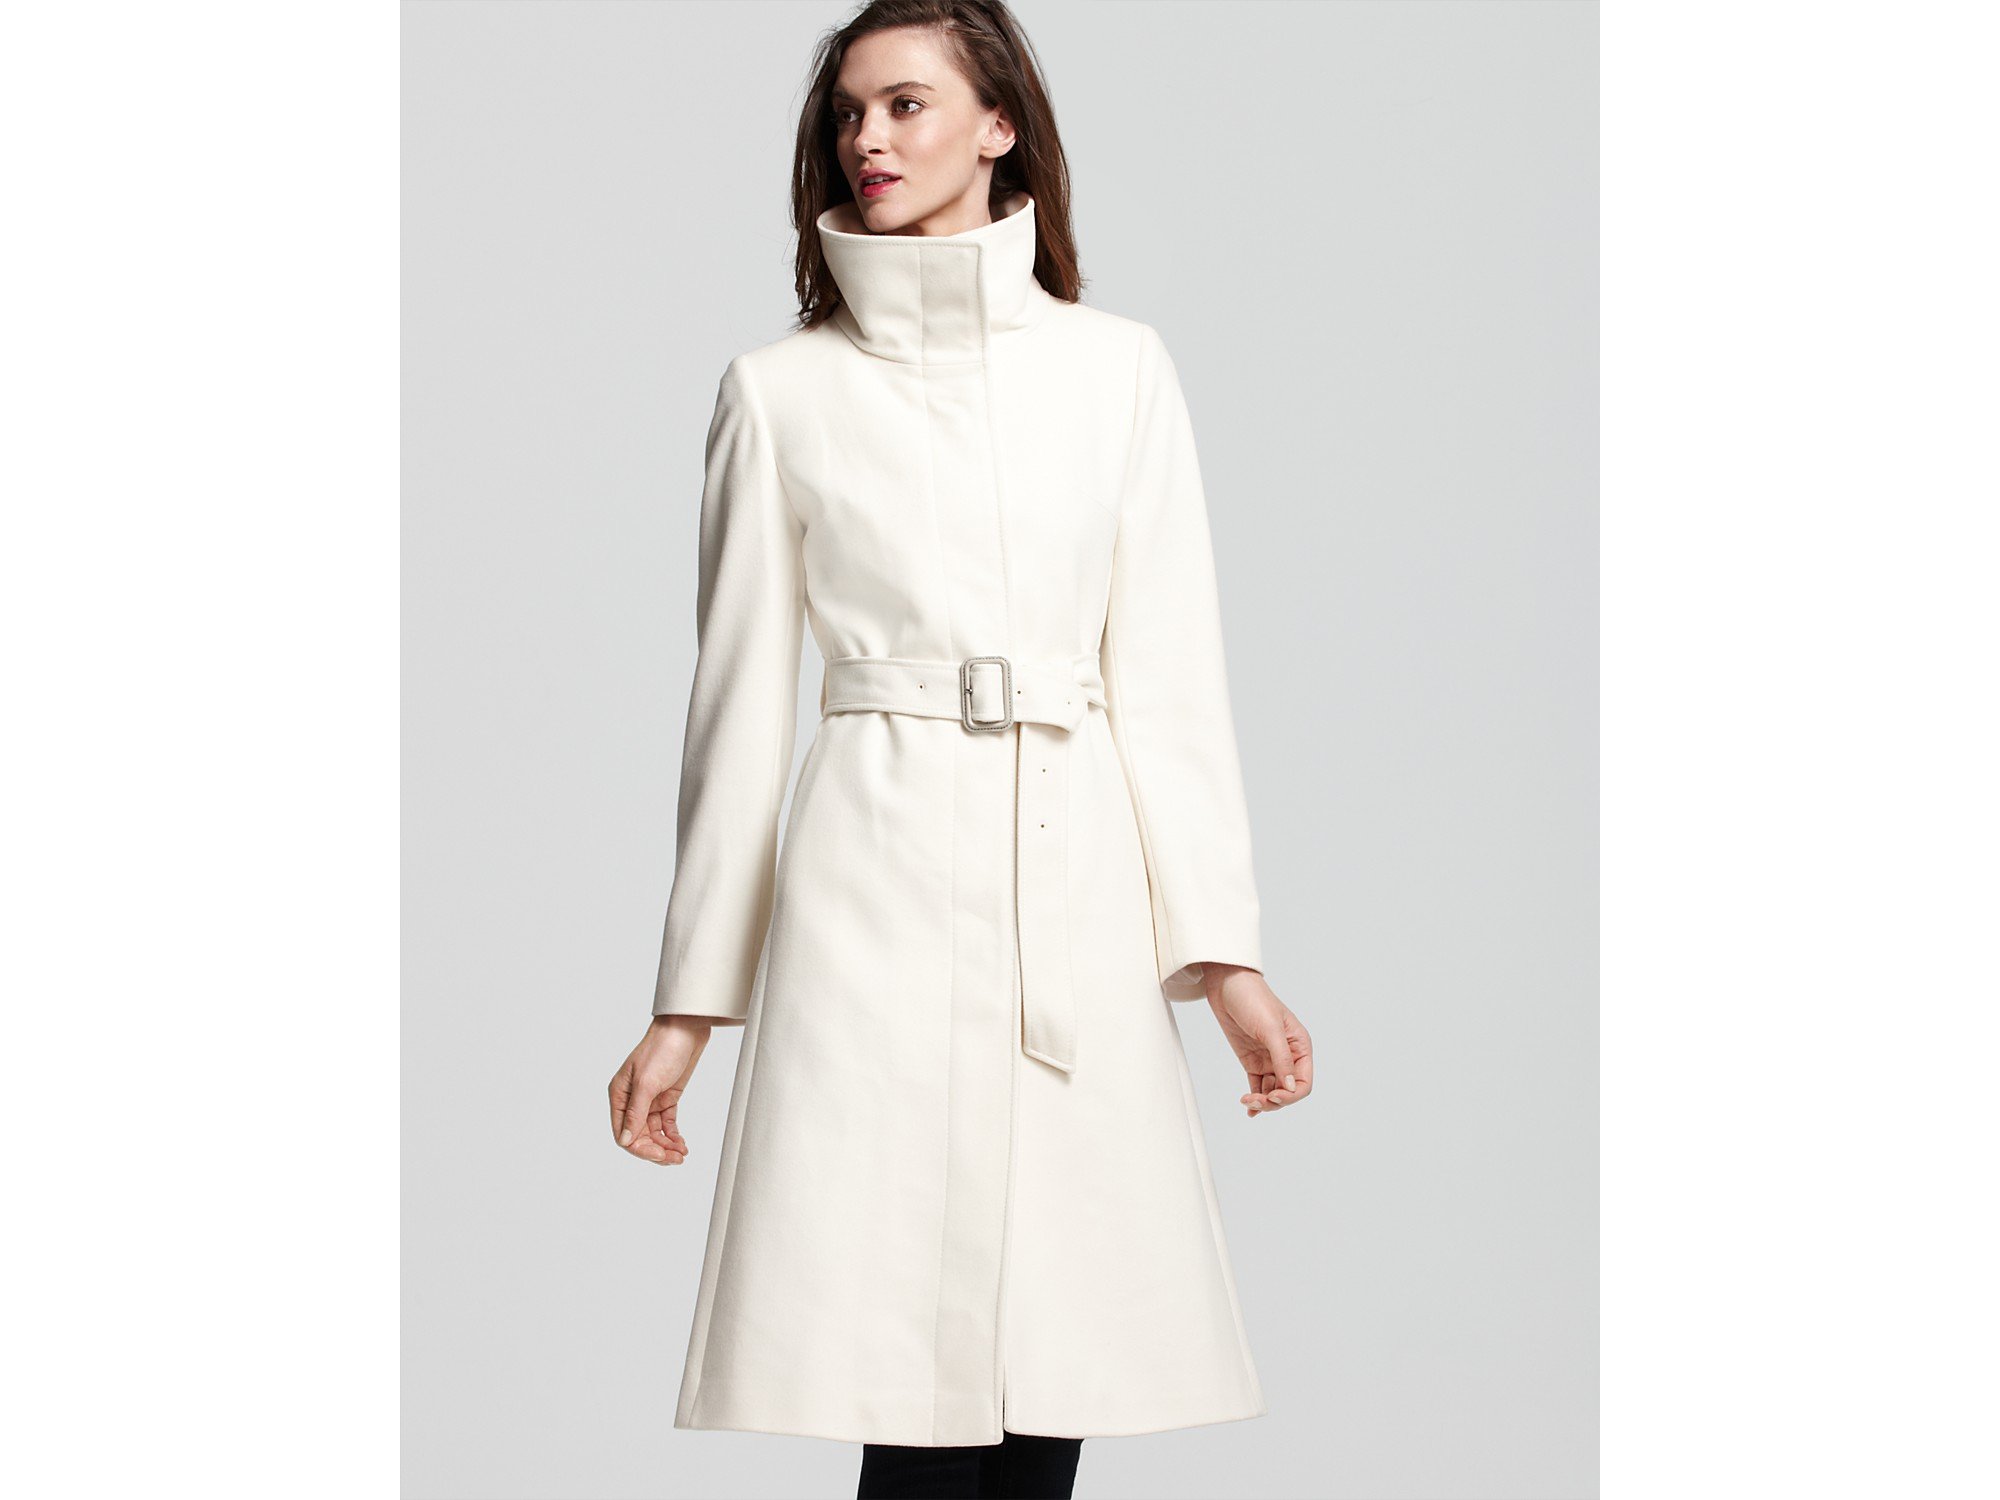 Lyst - Burberry Brit Long Belted Coat in White